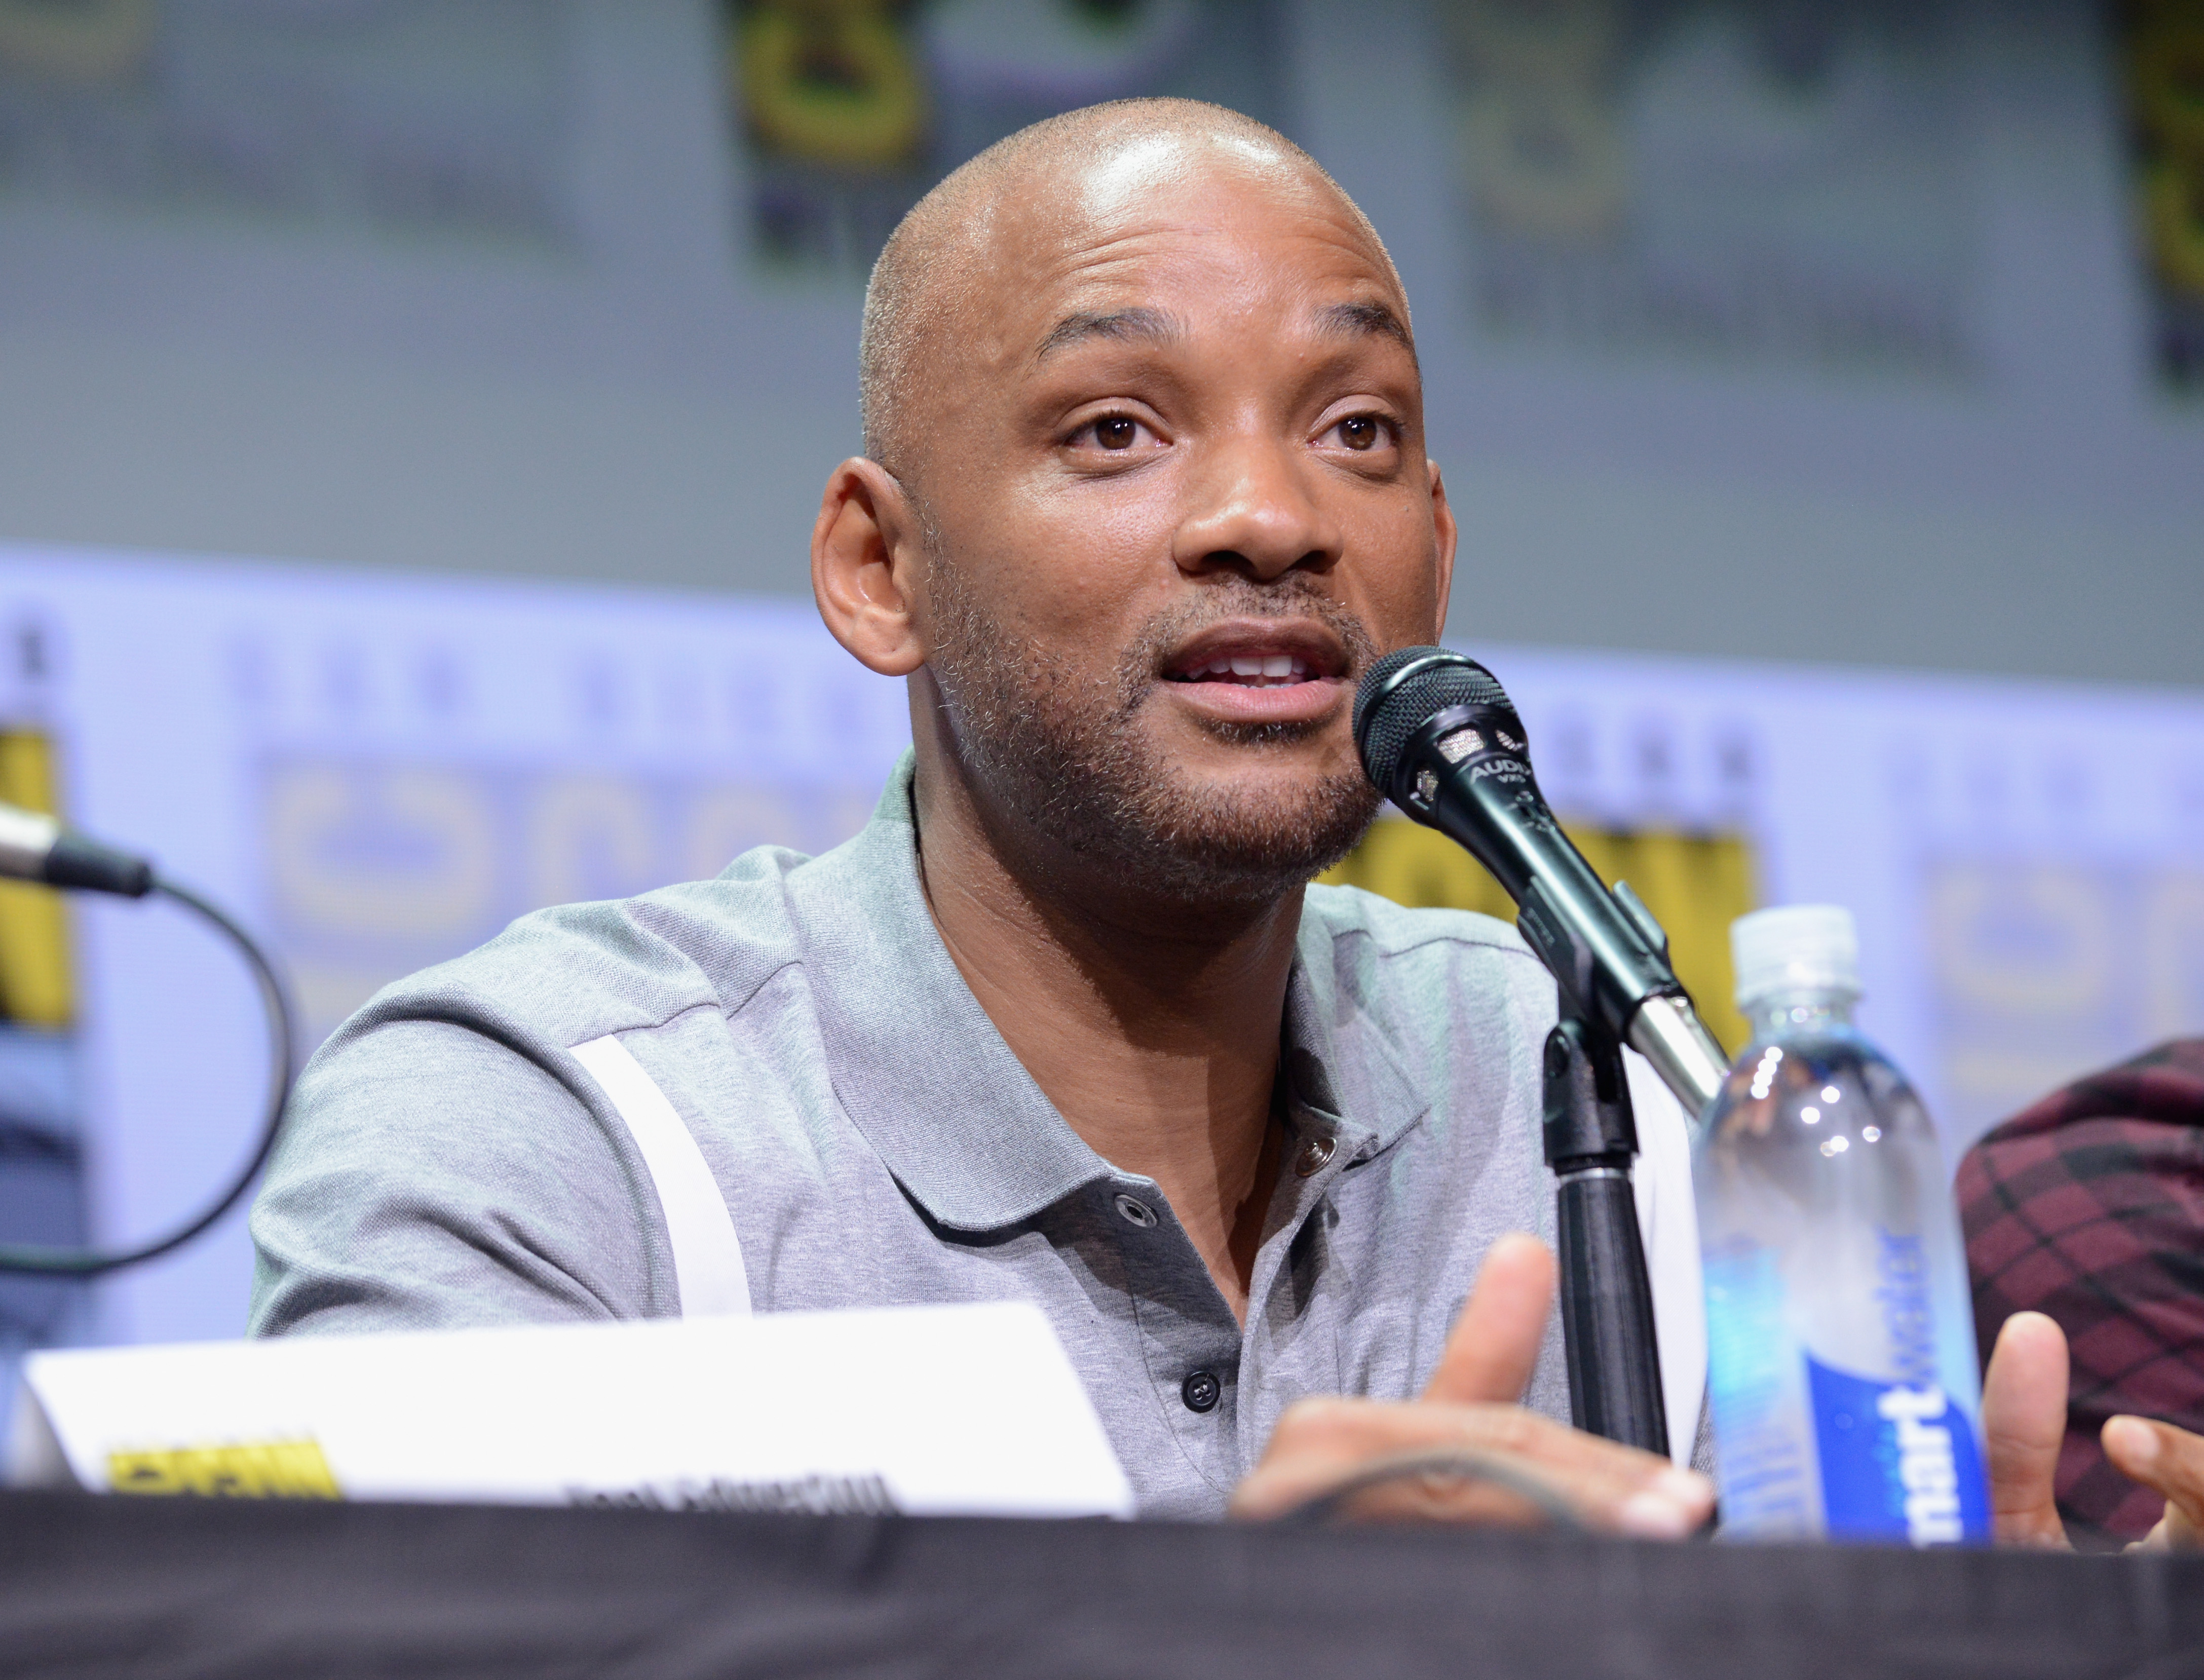 Comic-Con International 2017 - Netflix Films: 'Bright' And 'Death Note' Panel